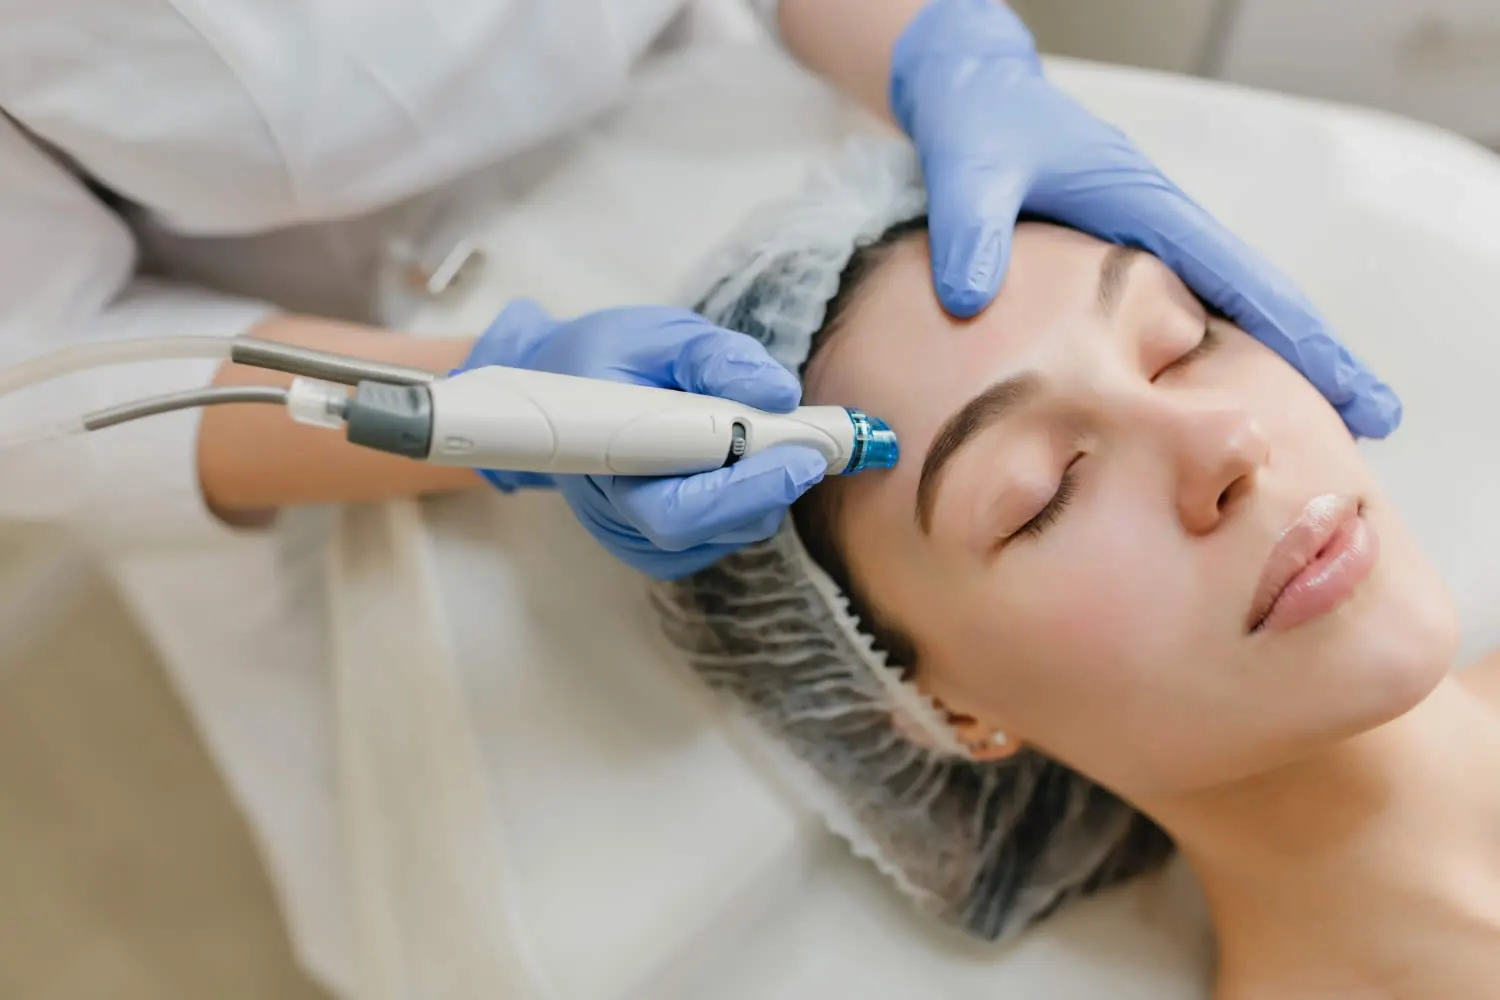 Prevent Signs of Aging and Skin Damage with CO2 Fractional Laser Treatment, General and Cosmetic Dermatology located in Reno, NV